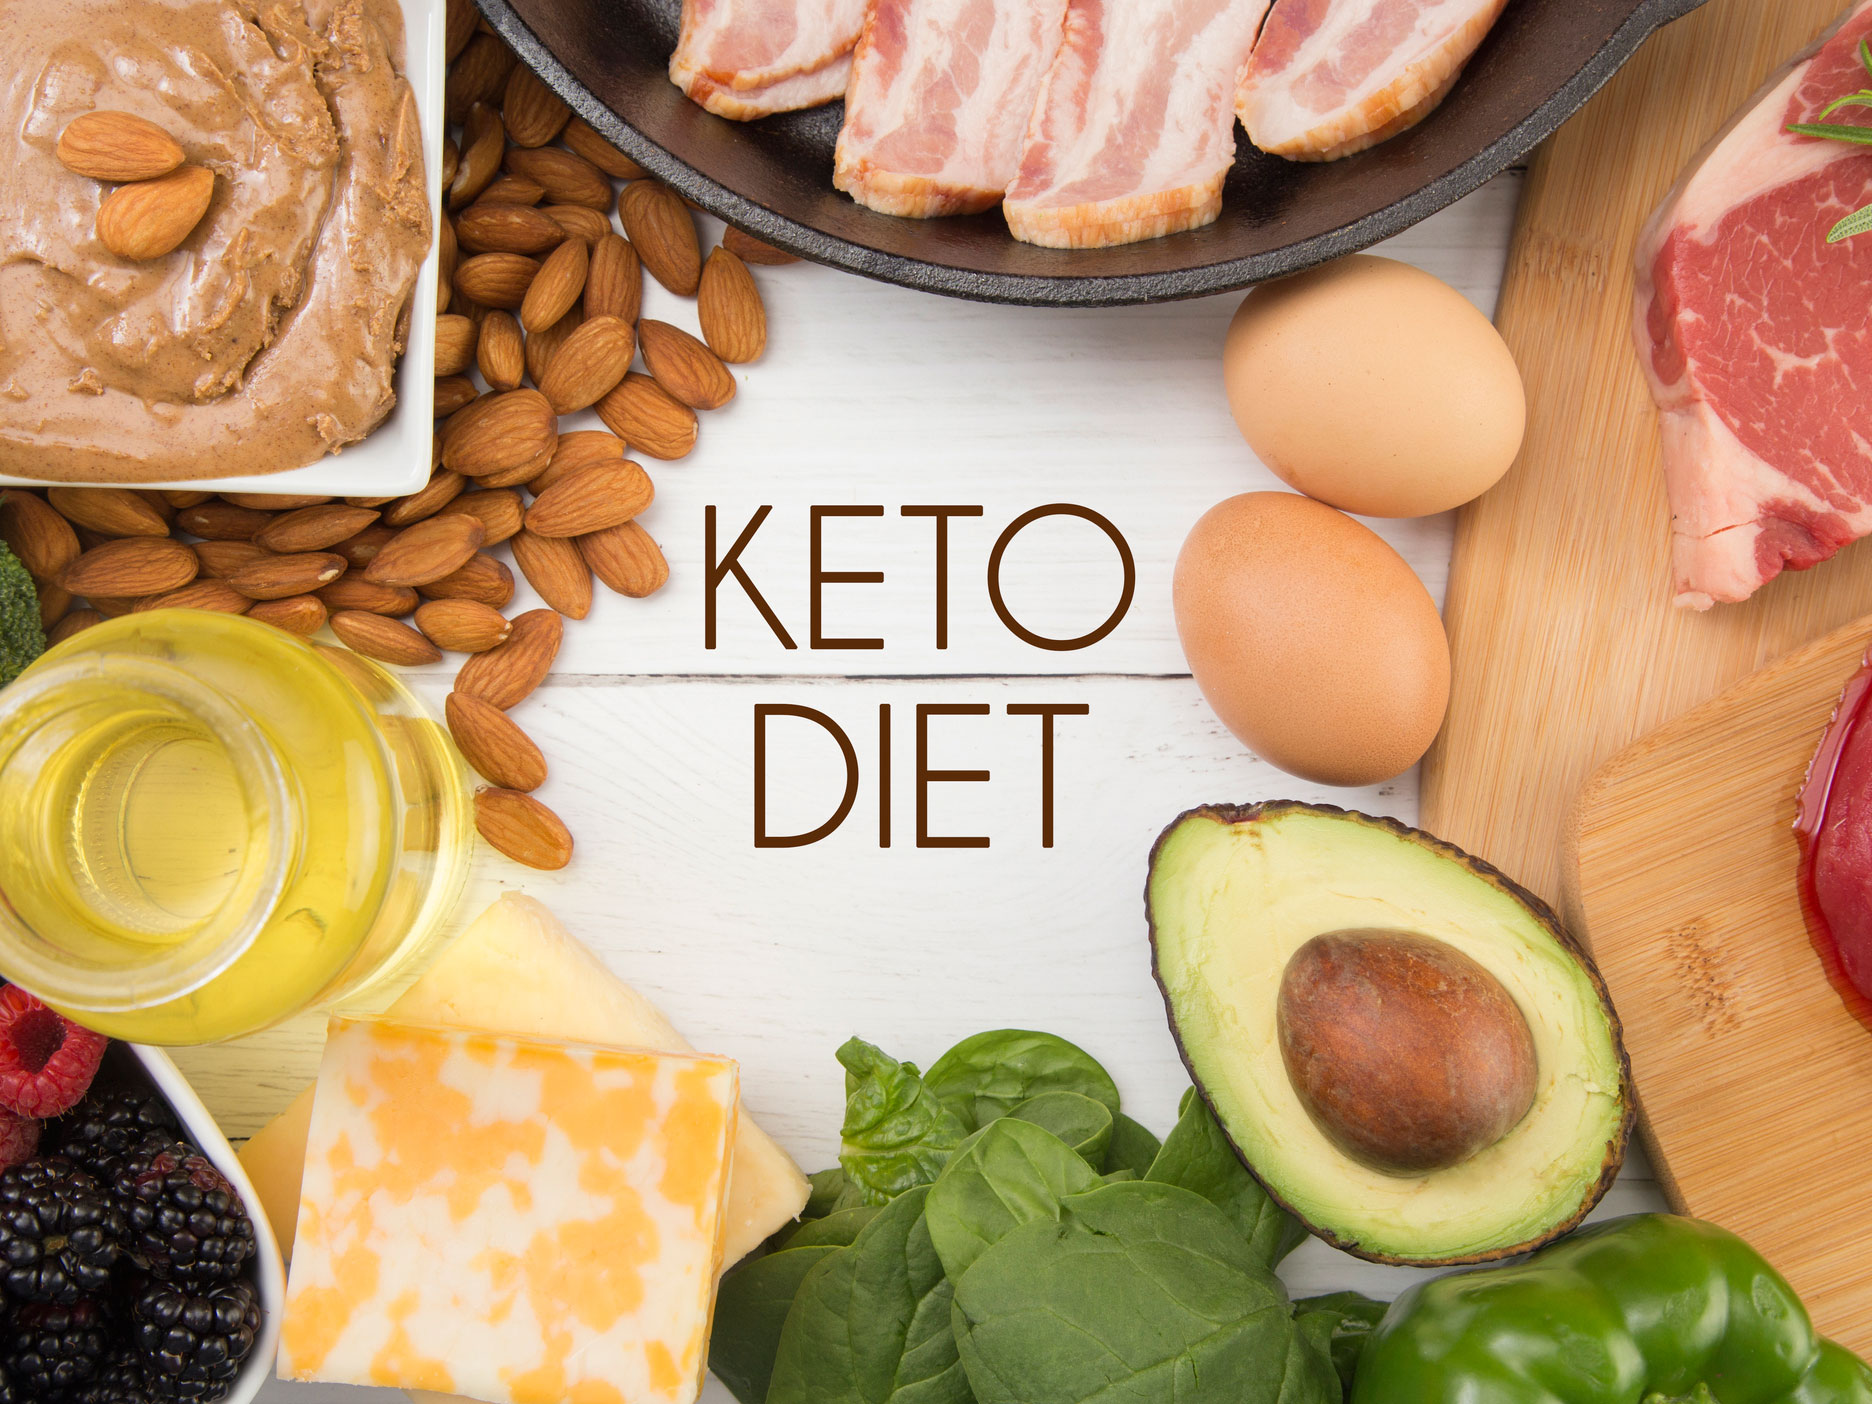 The anti-cancer potential of Keto